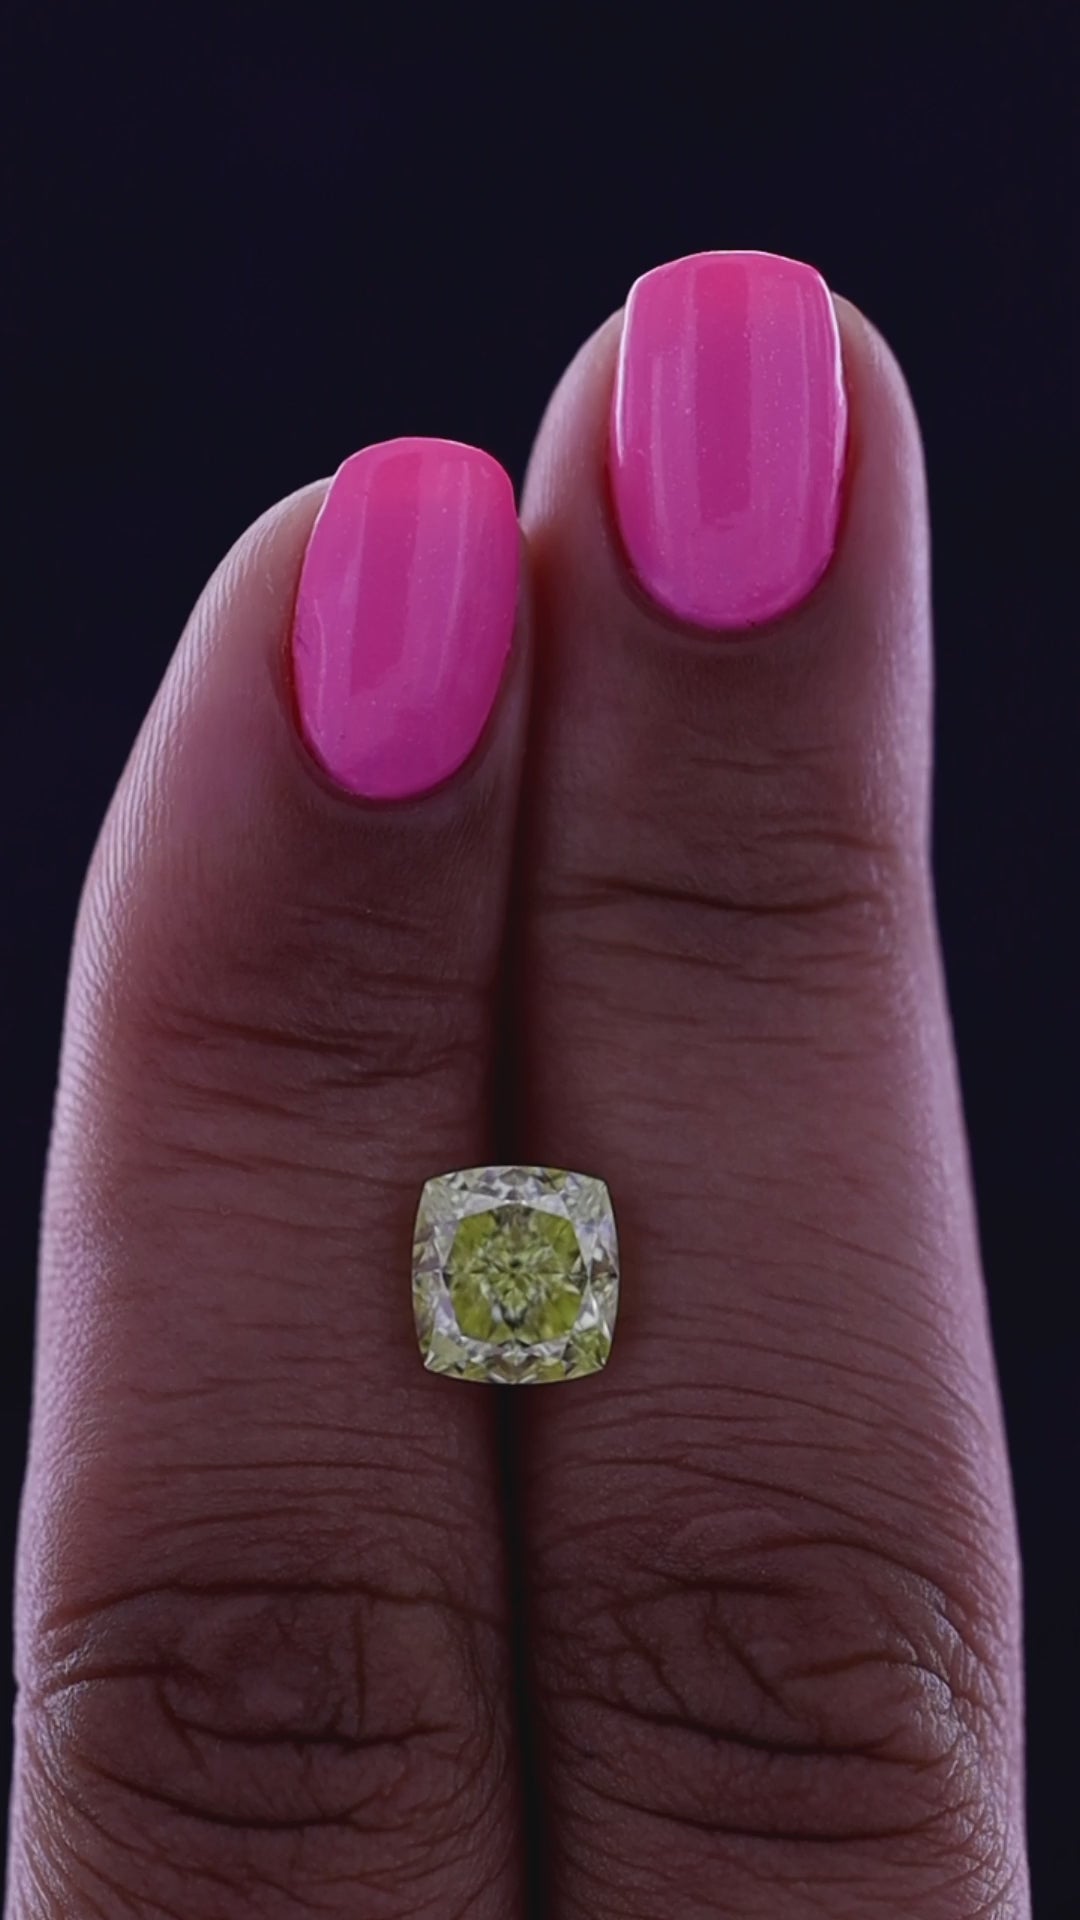 Explore the 3.01-carat Fancy Intense Yellow diamond, a stunning gem mined in Botswana and GIA certified. Available in Geneva by special request, this VS1 clarity diamond is a perfect investment opportunity, embodying the beauty and rarity of African nature. Secure this exquisite piece today.